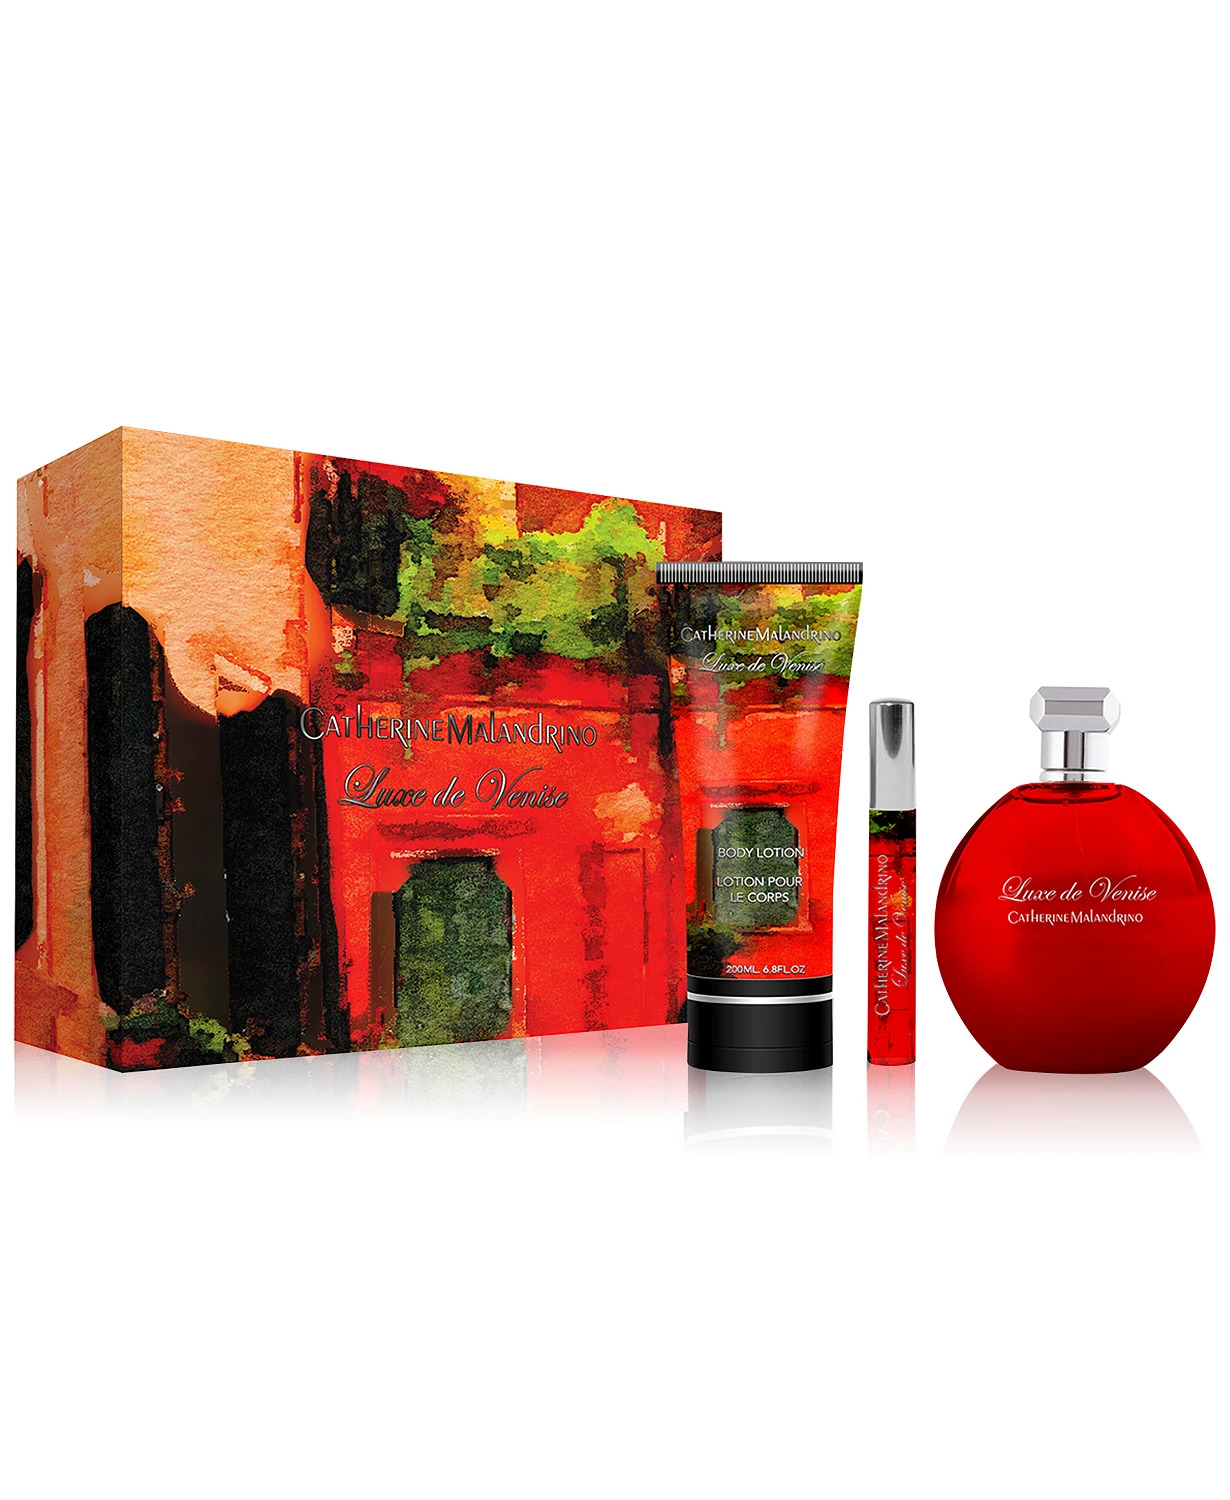 Perfume Gift Sets:3-Pc Catherine Malandrino Luxe de Venise Gift Set & More $25 Each + $10 Slickdeals Cashback + Free Shipping or Store Pickup at Macys